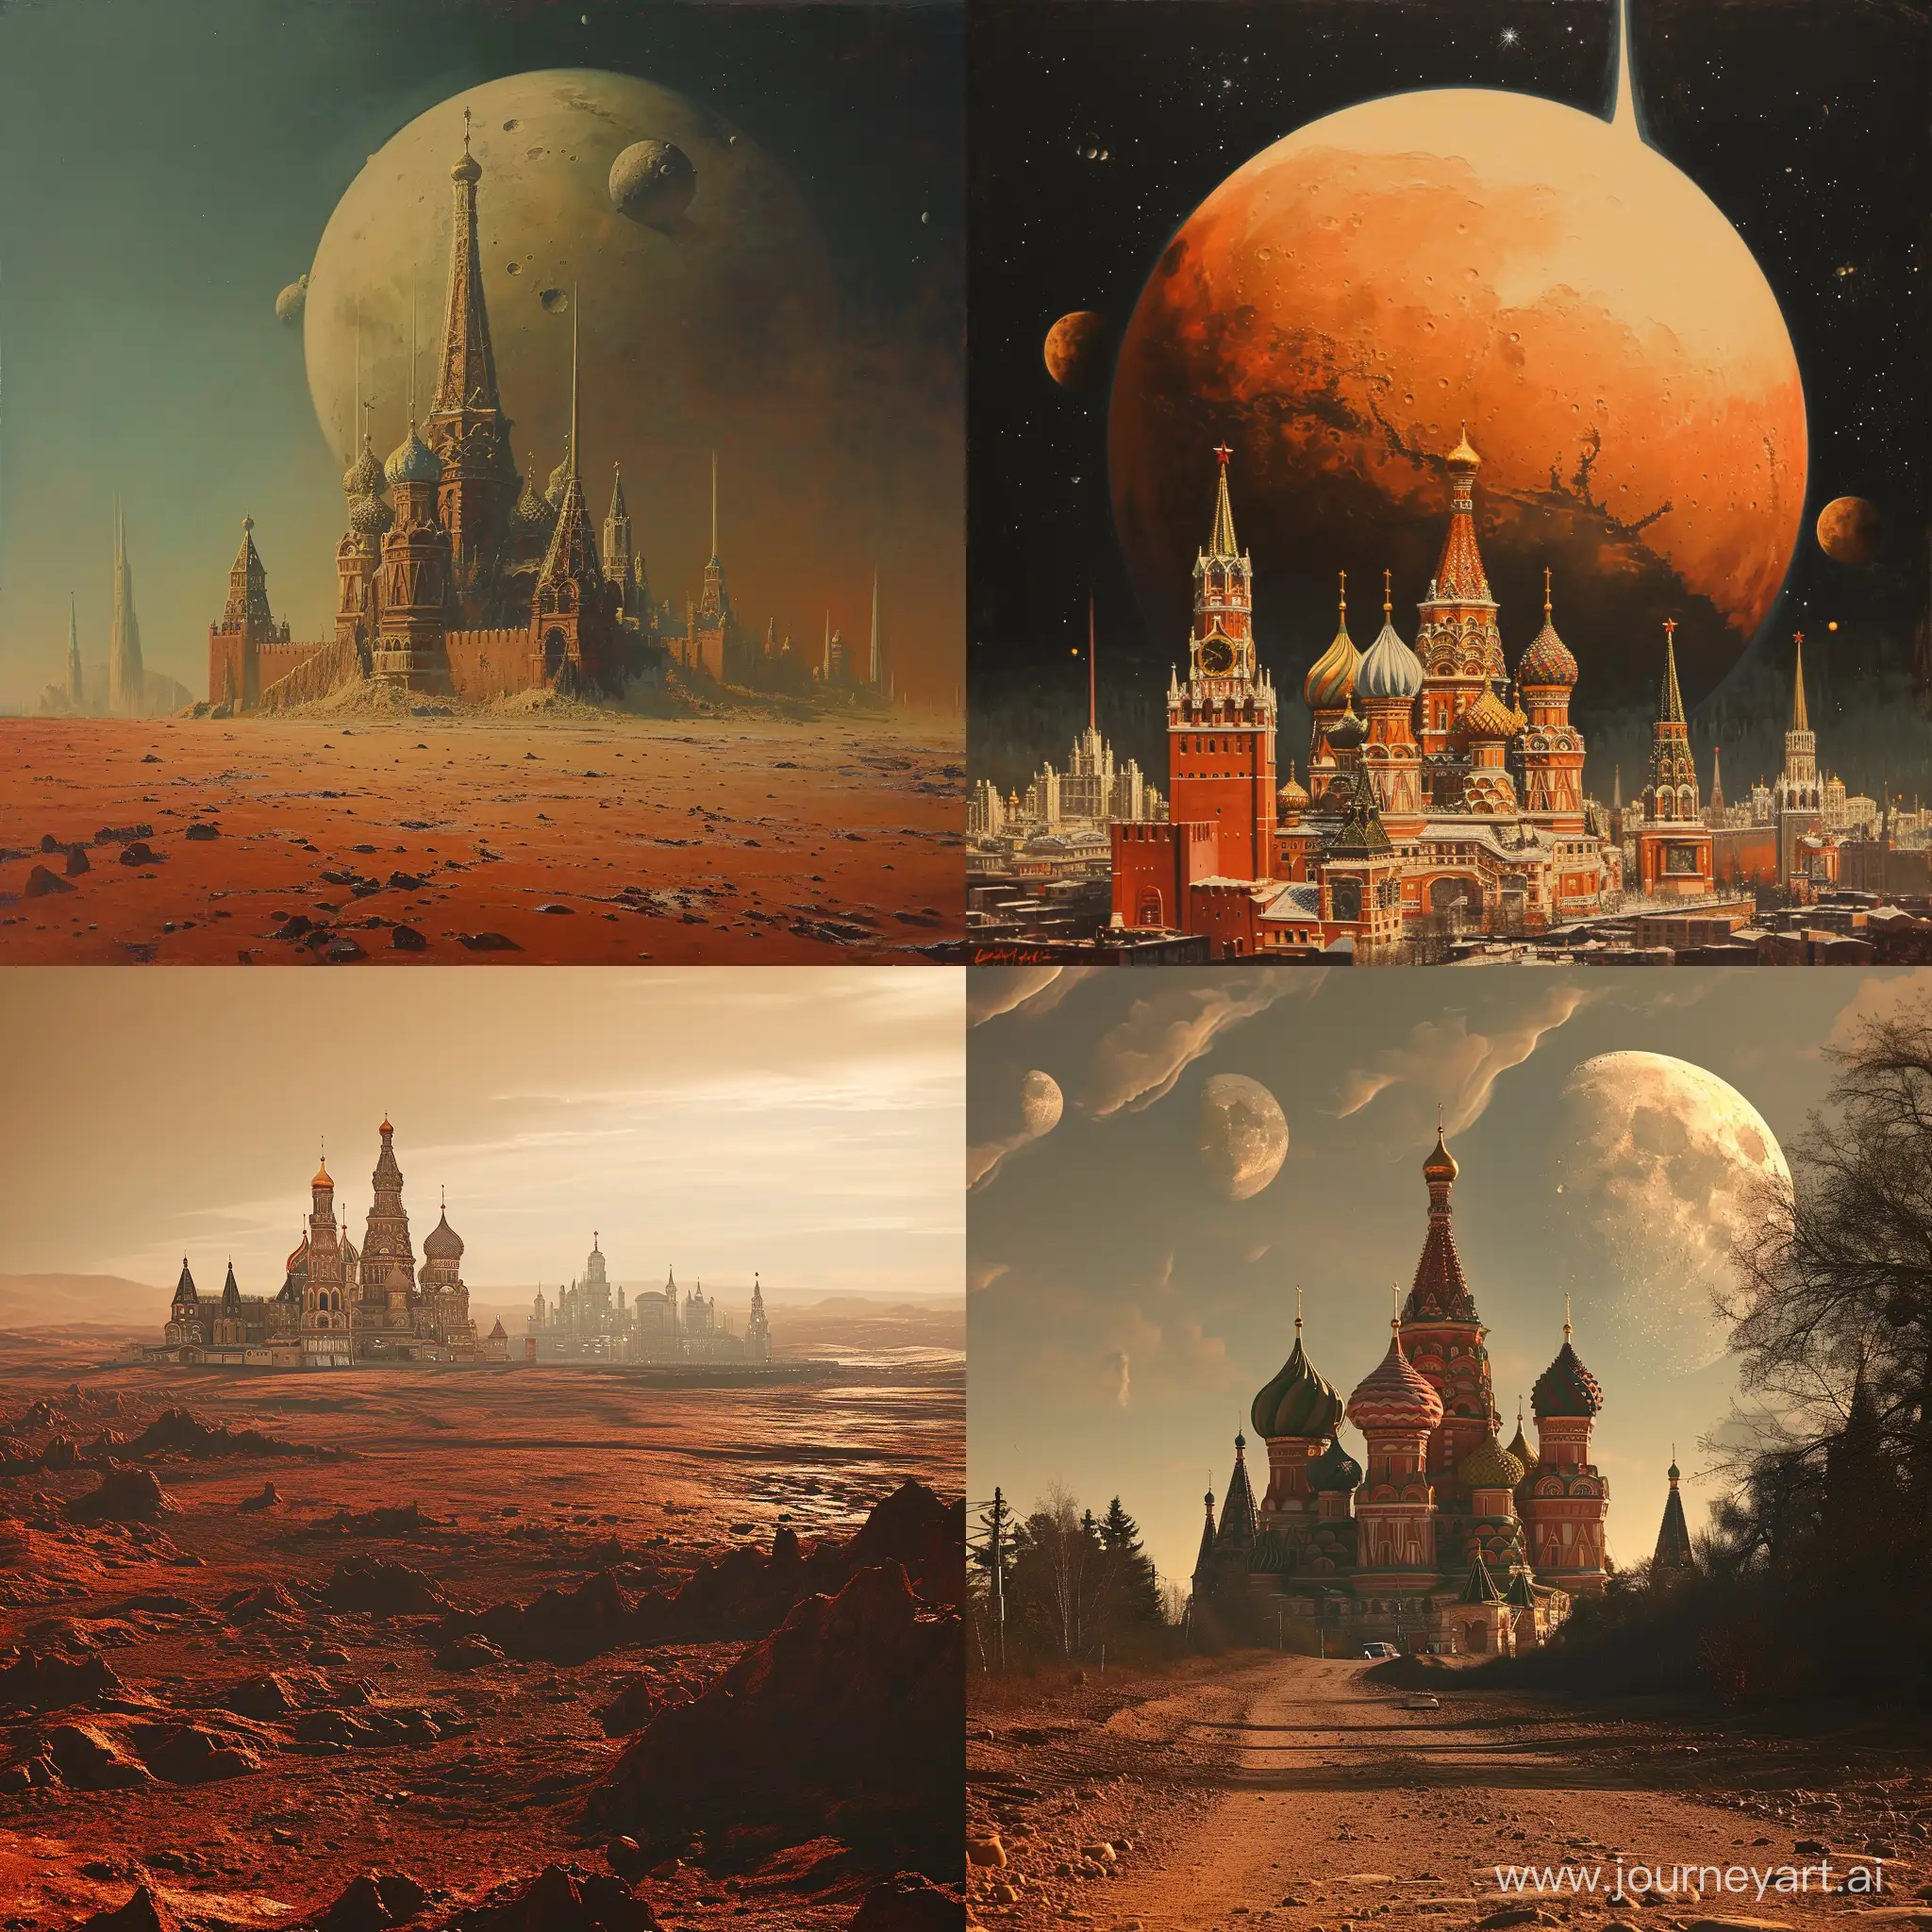 Moscow on Mars
